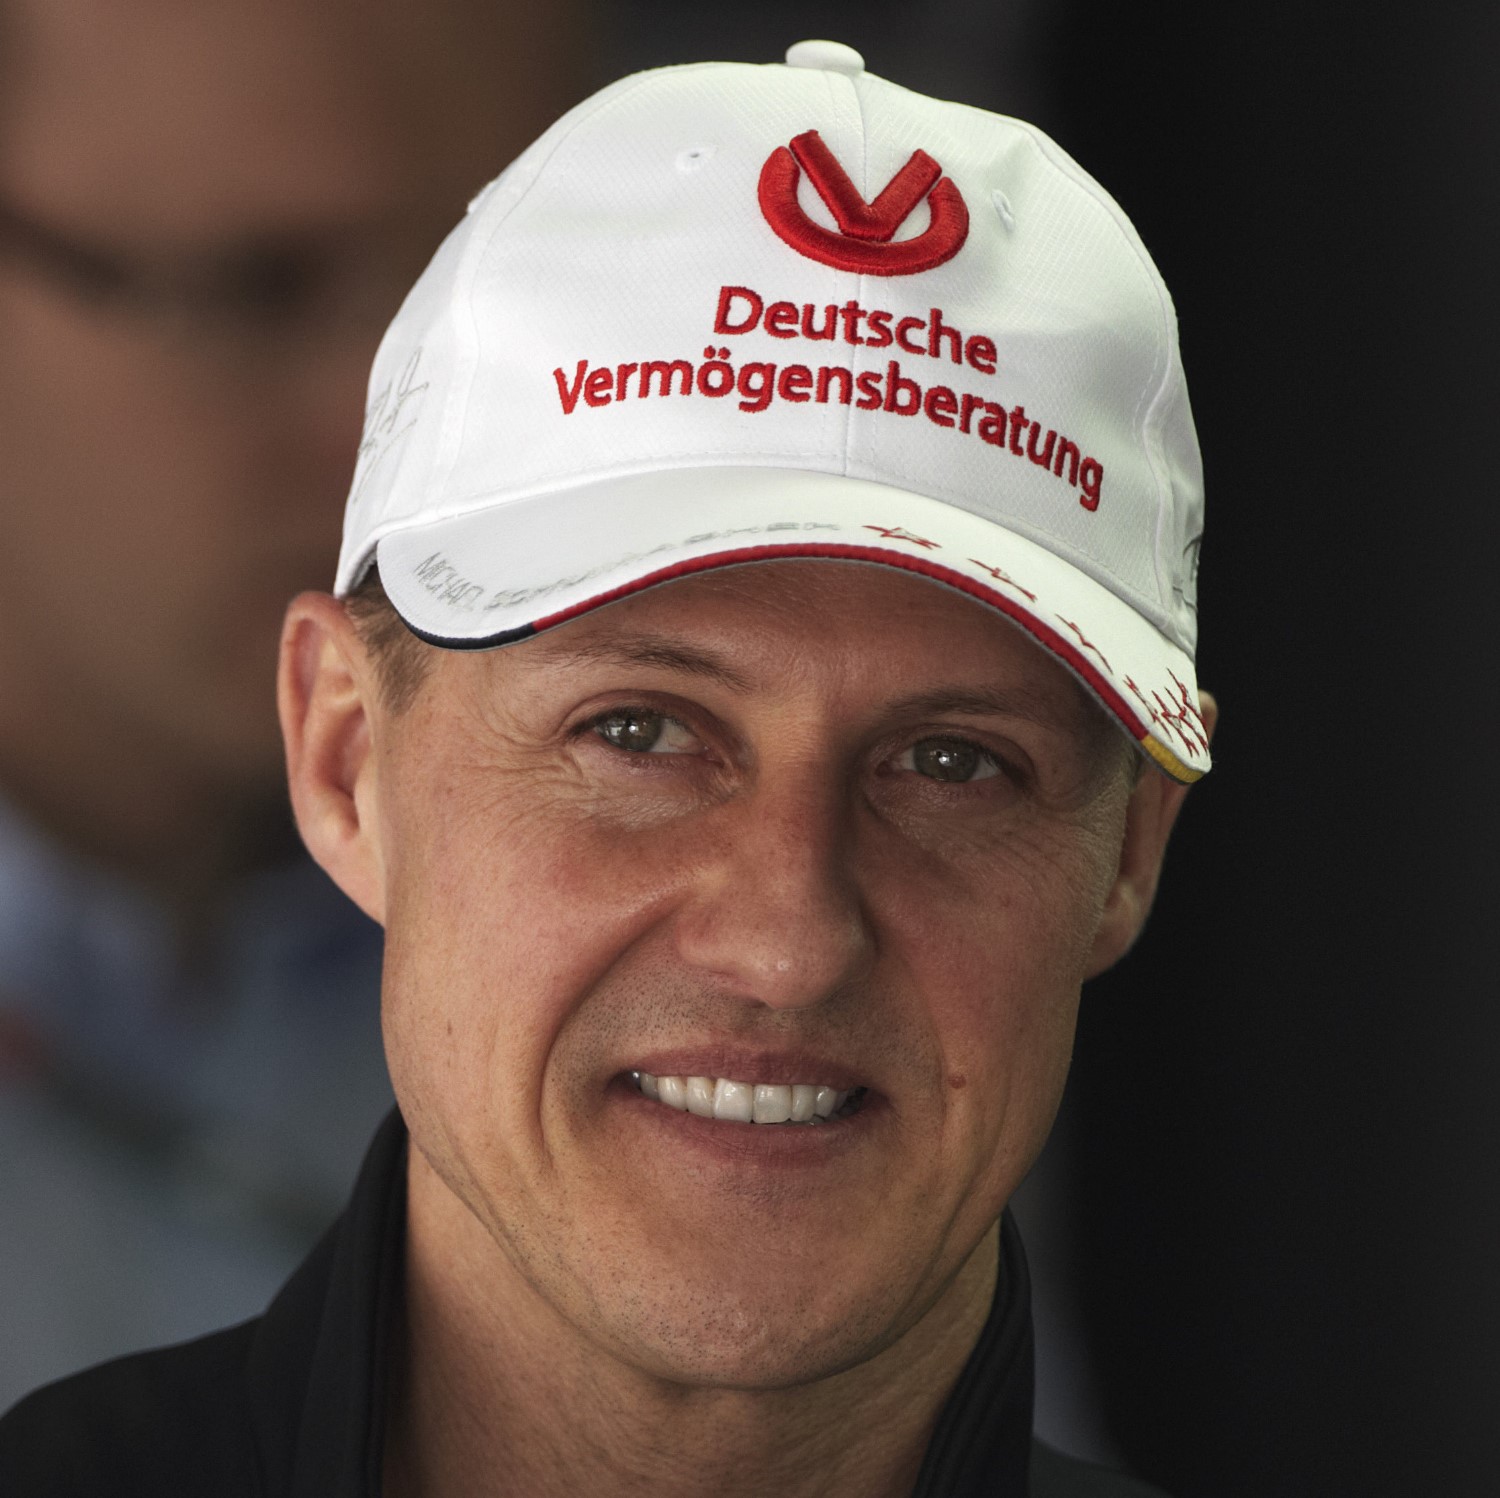 Michael Schumacher - will we ever see him in public again?